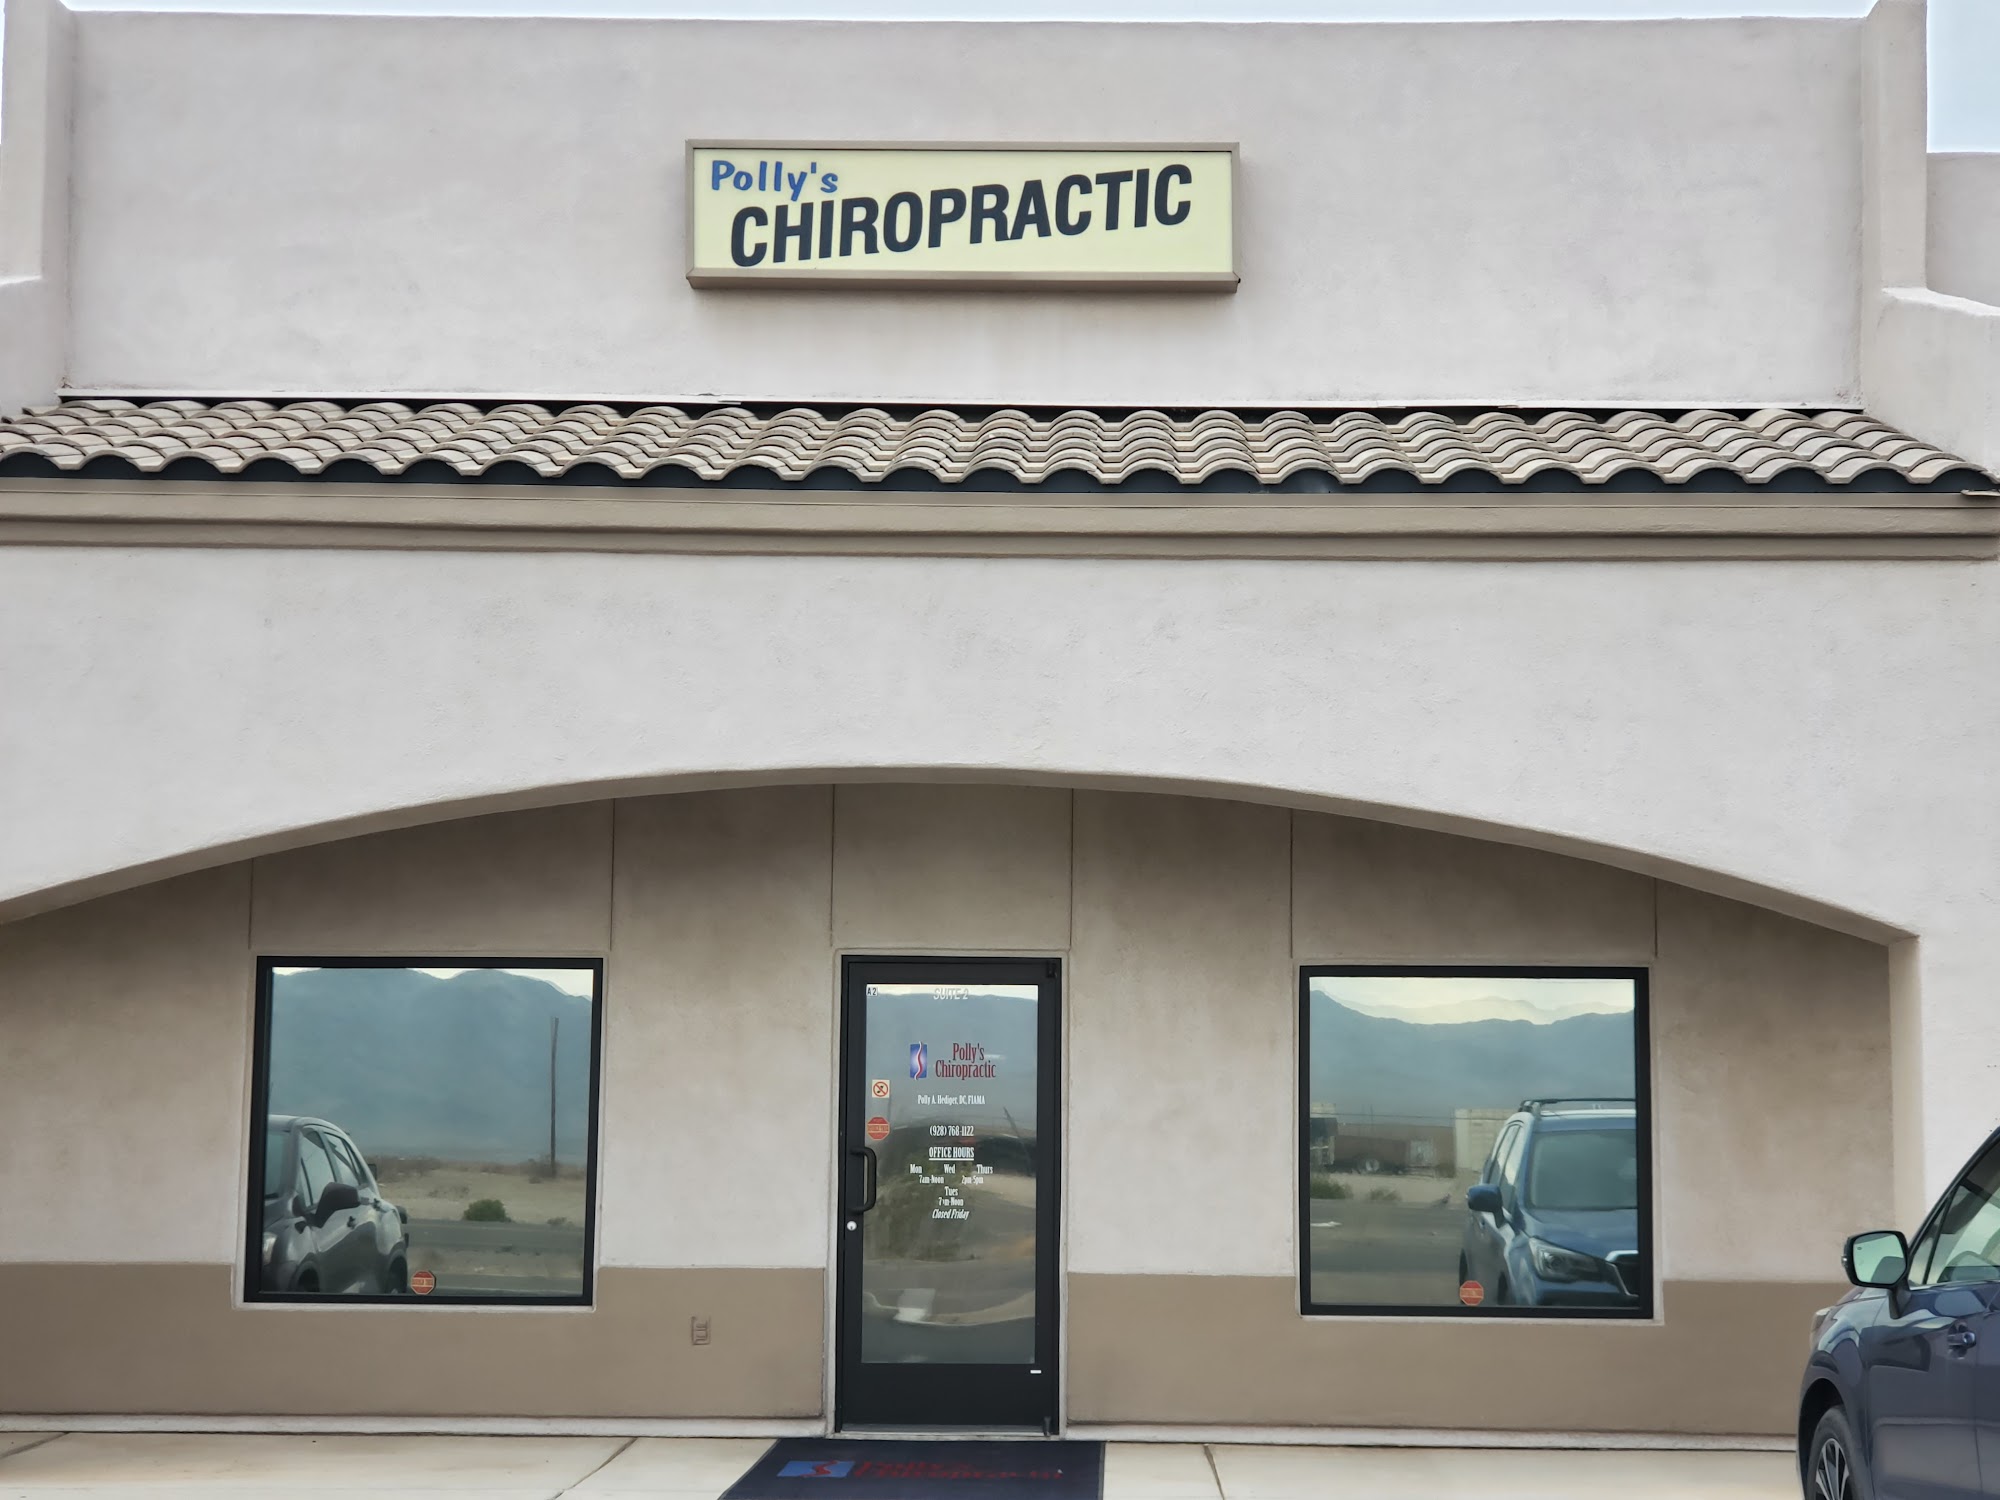 Polly's Chiropractic 5810 S, AZ-95 #2, Fort Mohave Arizona 86426